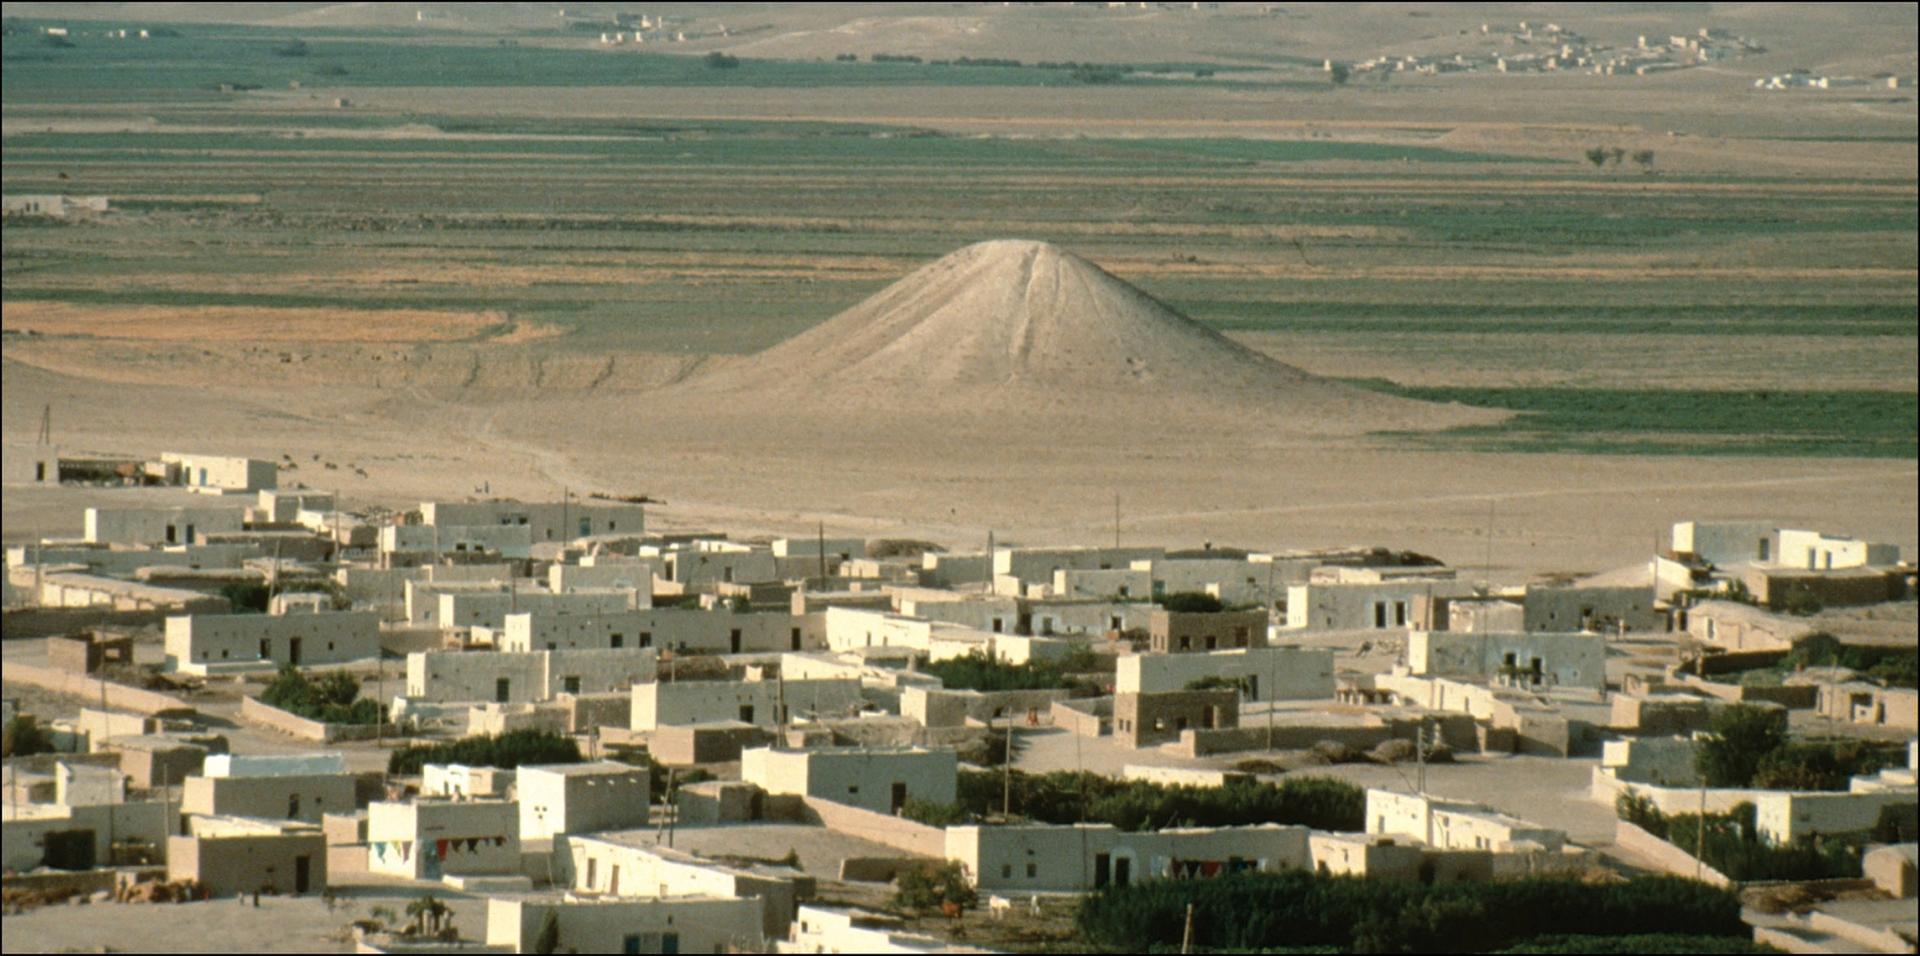 The White Monument at Tal Banat, Syria, before it was submerged Photo: University of Toronto